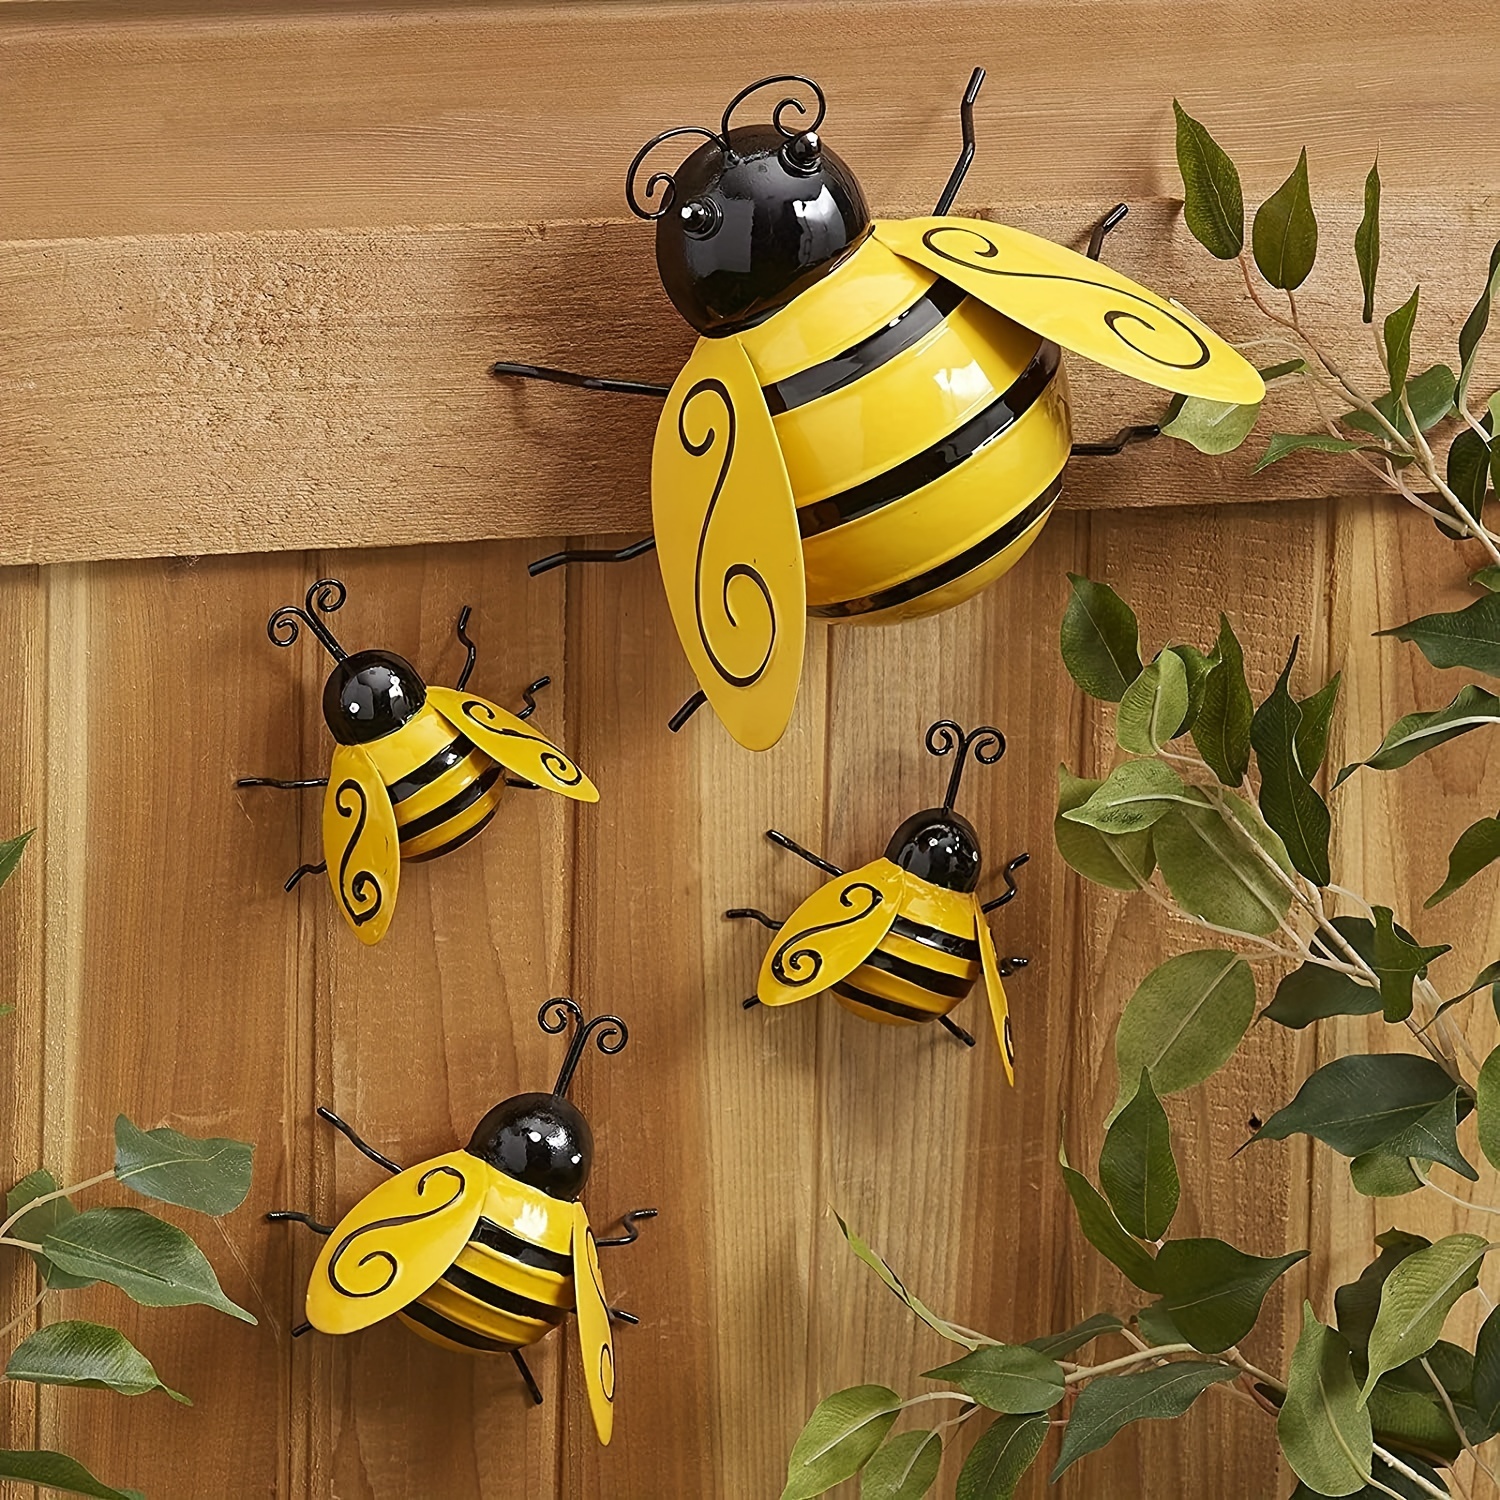 3 Pieces Bee Table Decor Signs Bee Classroom Decorations Bee Decorations for Classroom Bee Themed Classroom Bee Stuff Bumble Bee Decorations for Home